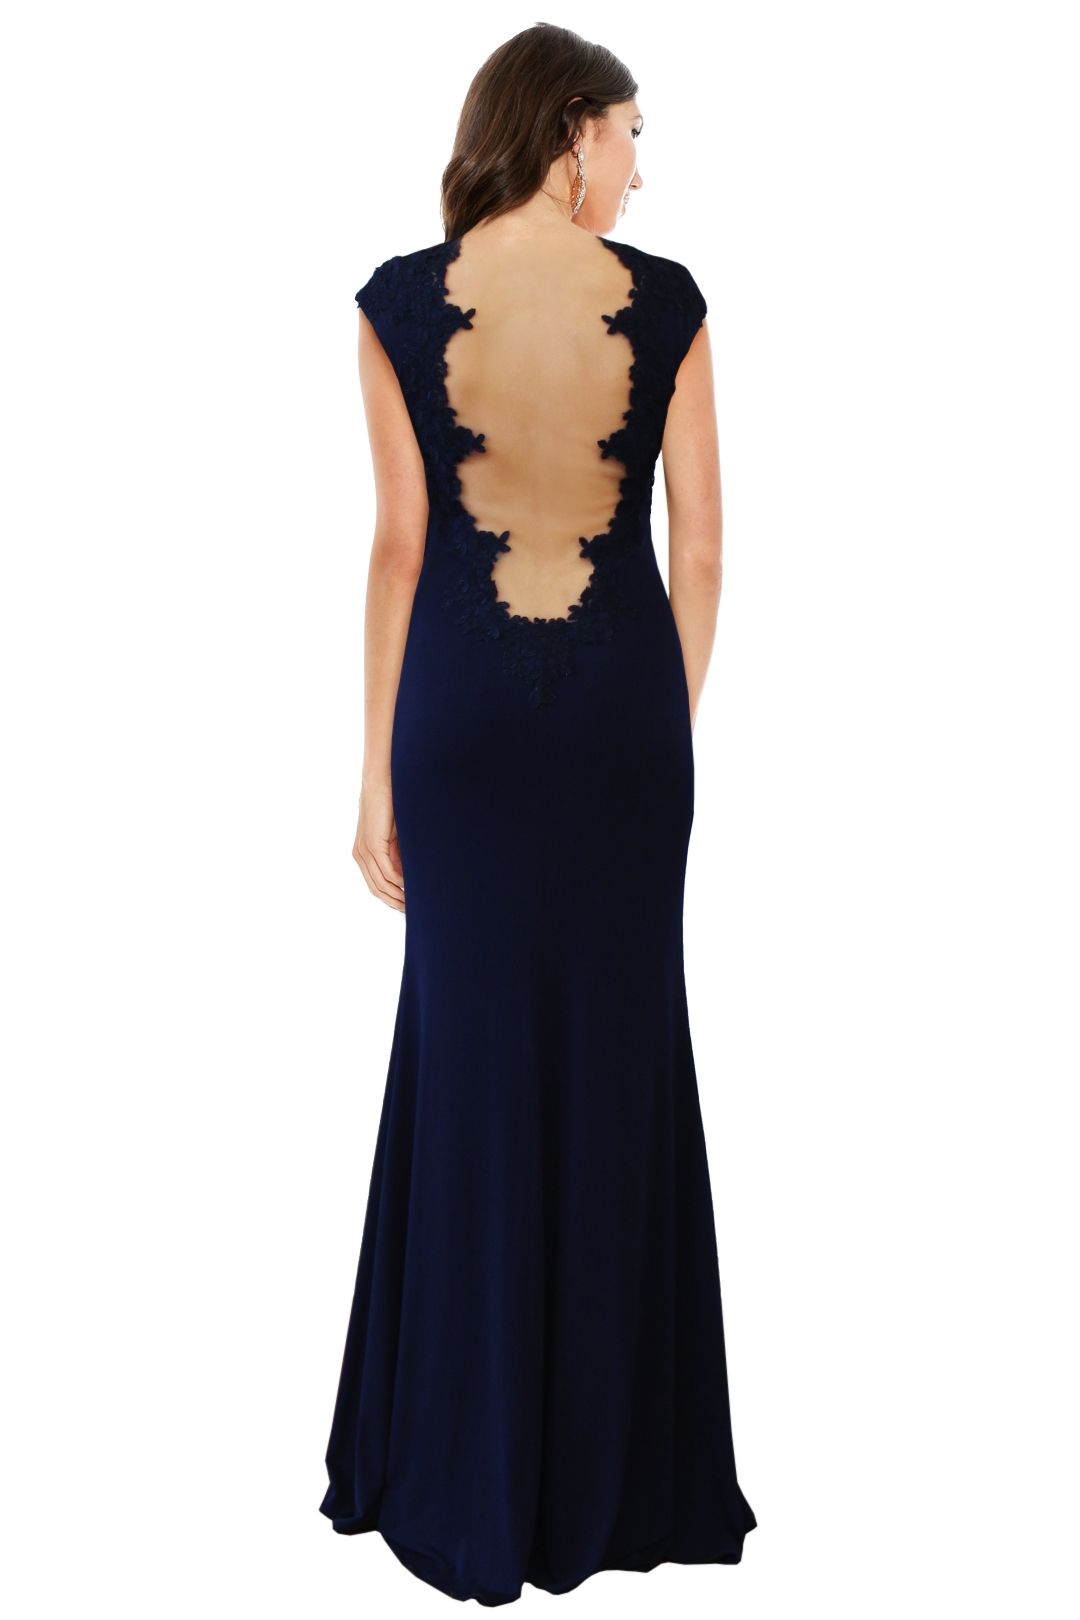 Rose Noir - Midnight Navy Lace Gown - Navy - Back